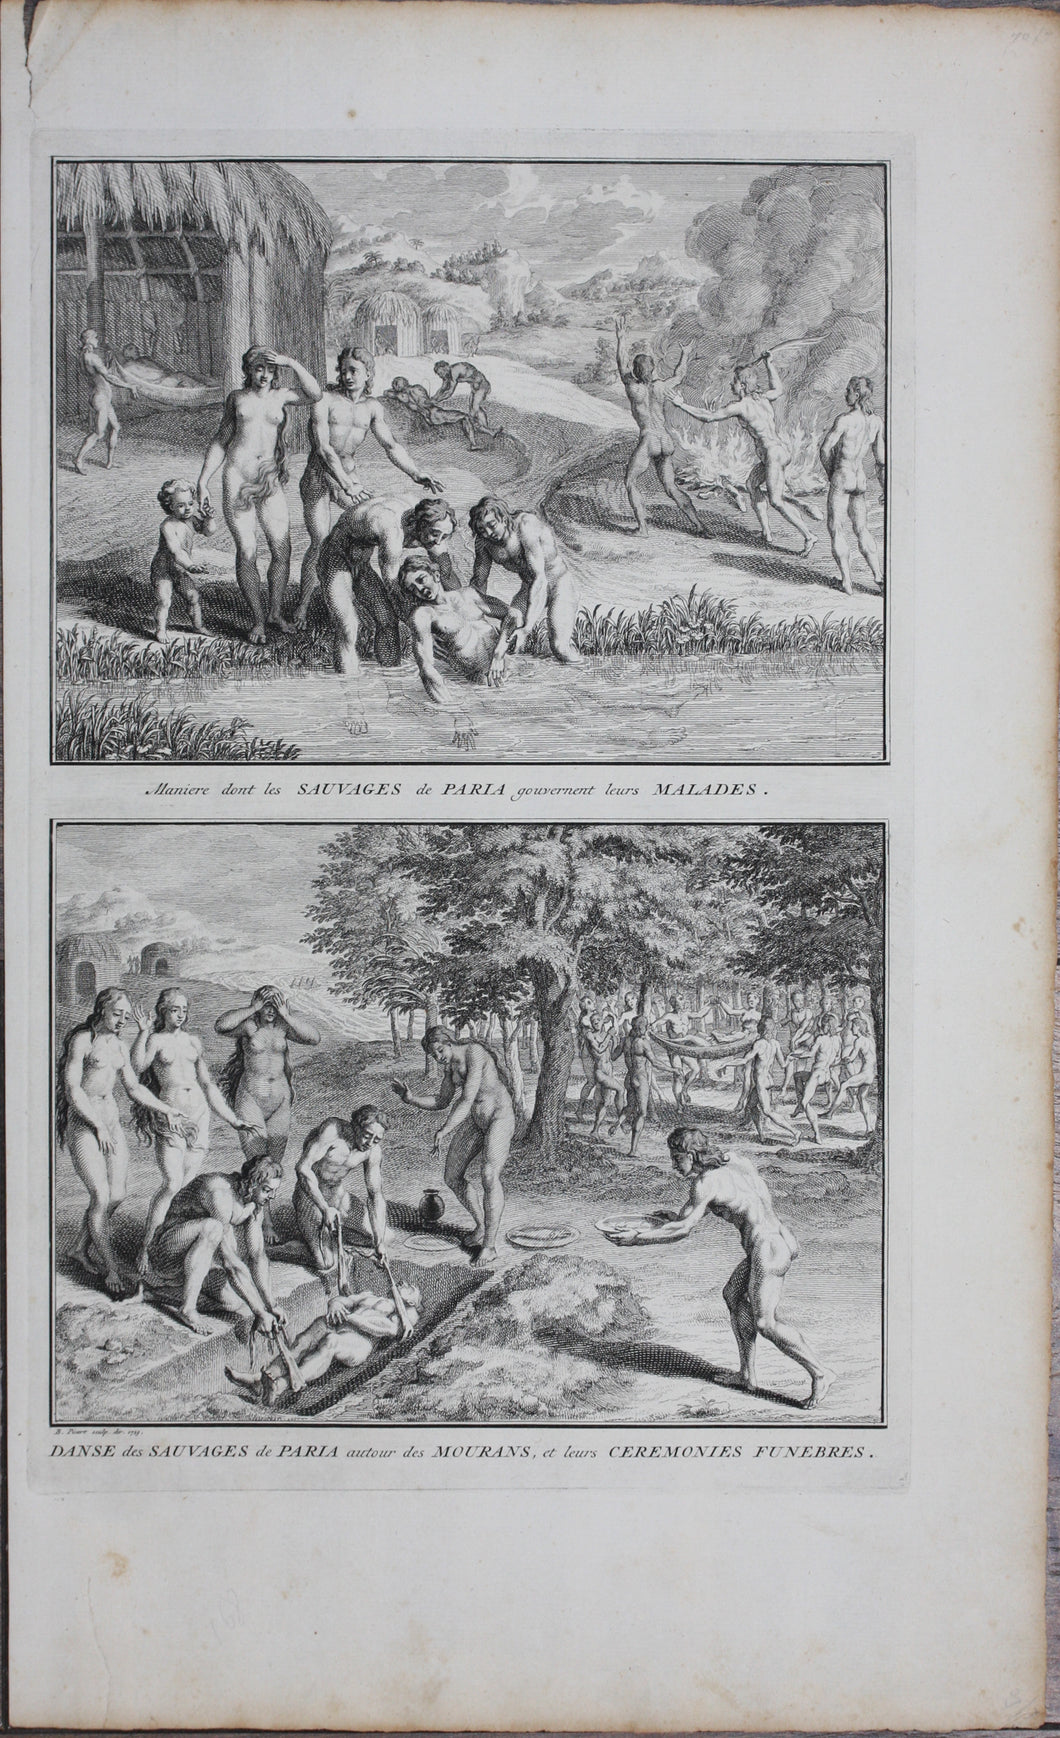 Bernard Picart. Treatment of the sick and burying the dead savages in Venezuela. Engraving. 1723.